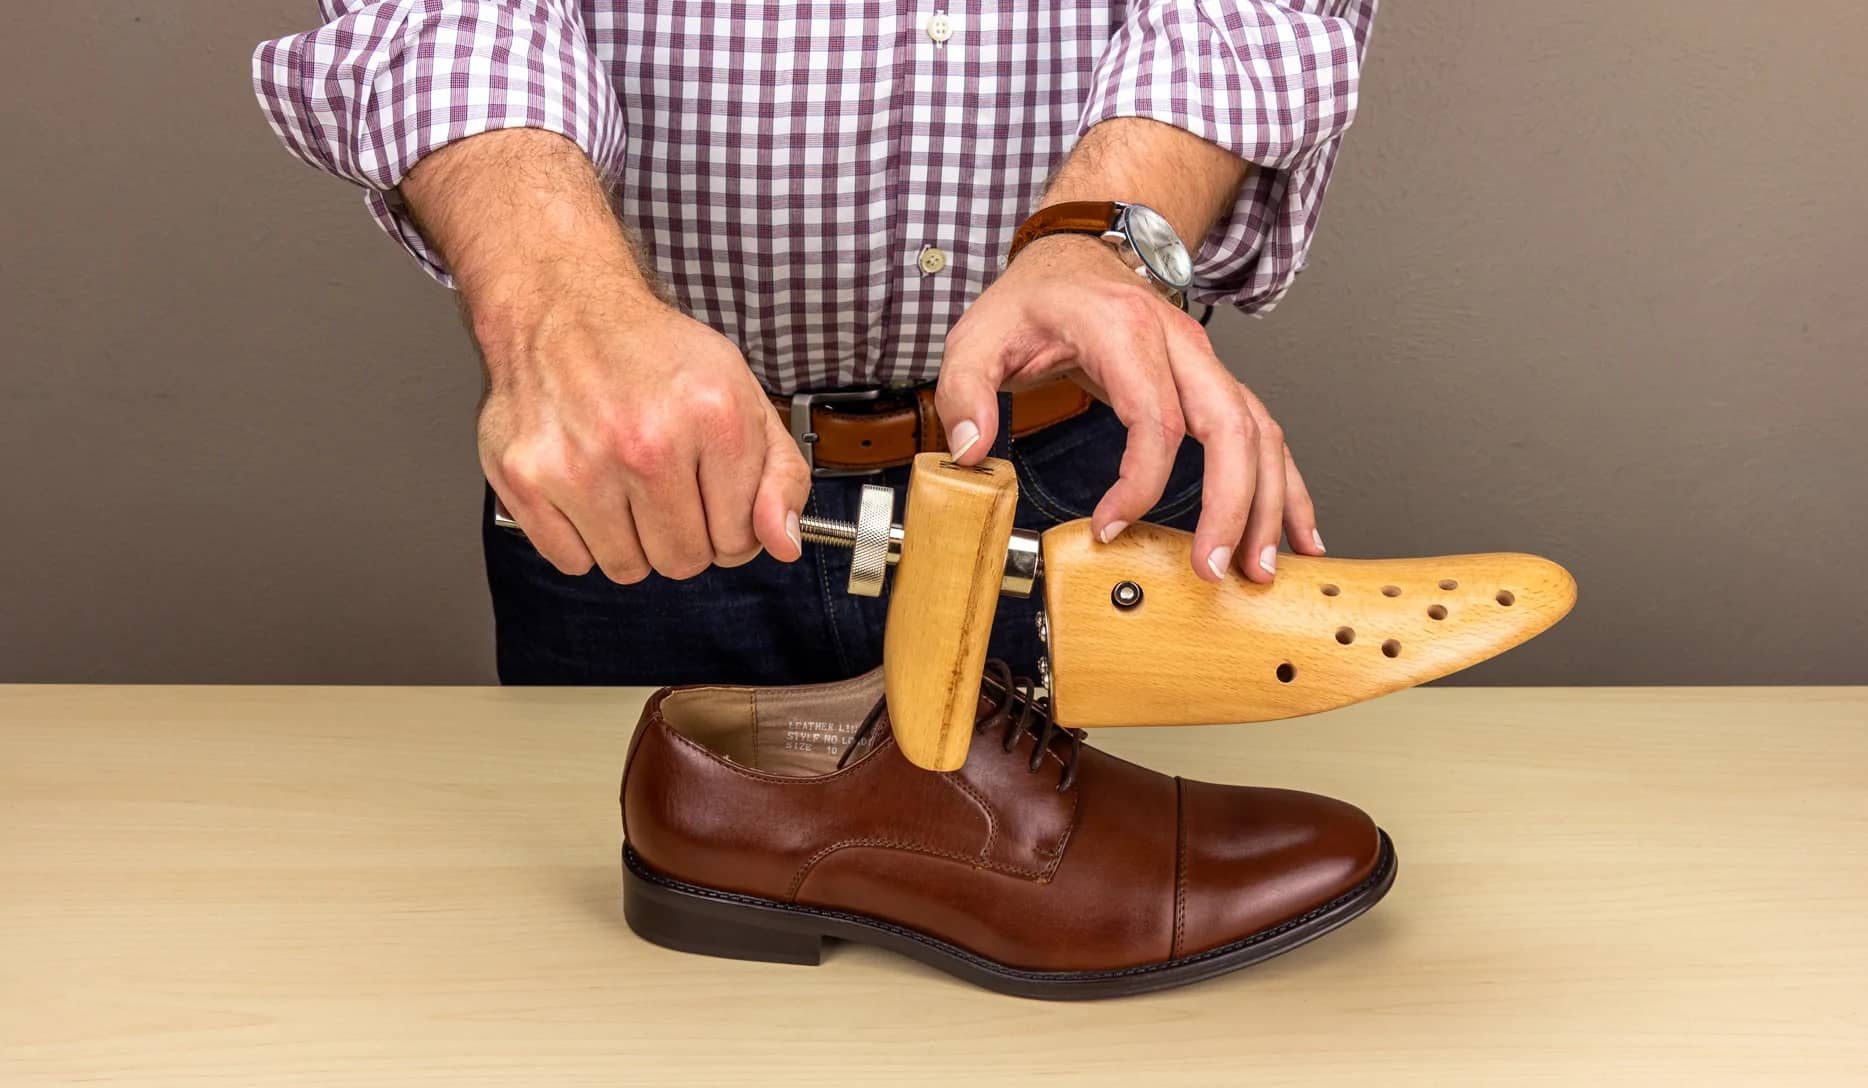 How to Stretch Shoes and Boots at Home Like a DIY Pro – FootFitter